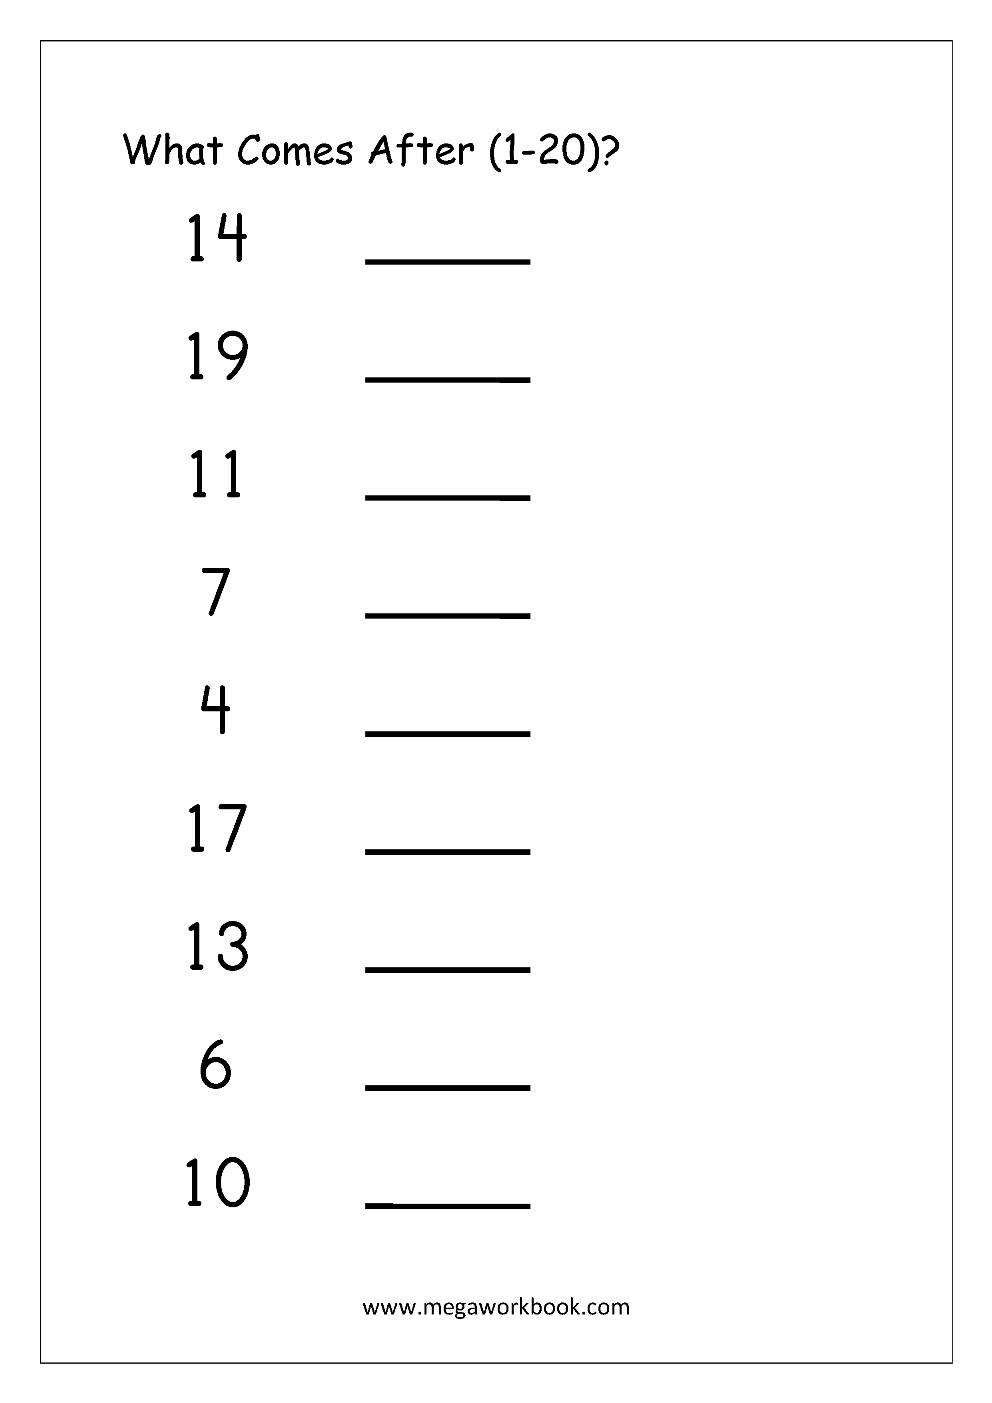 Ordering Numbers Worksheets, Missing Numbers, What Comes Before And - Free Printable Tracing Numbers 1 20 Worksheets